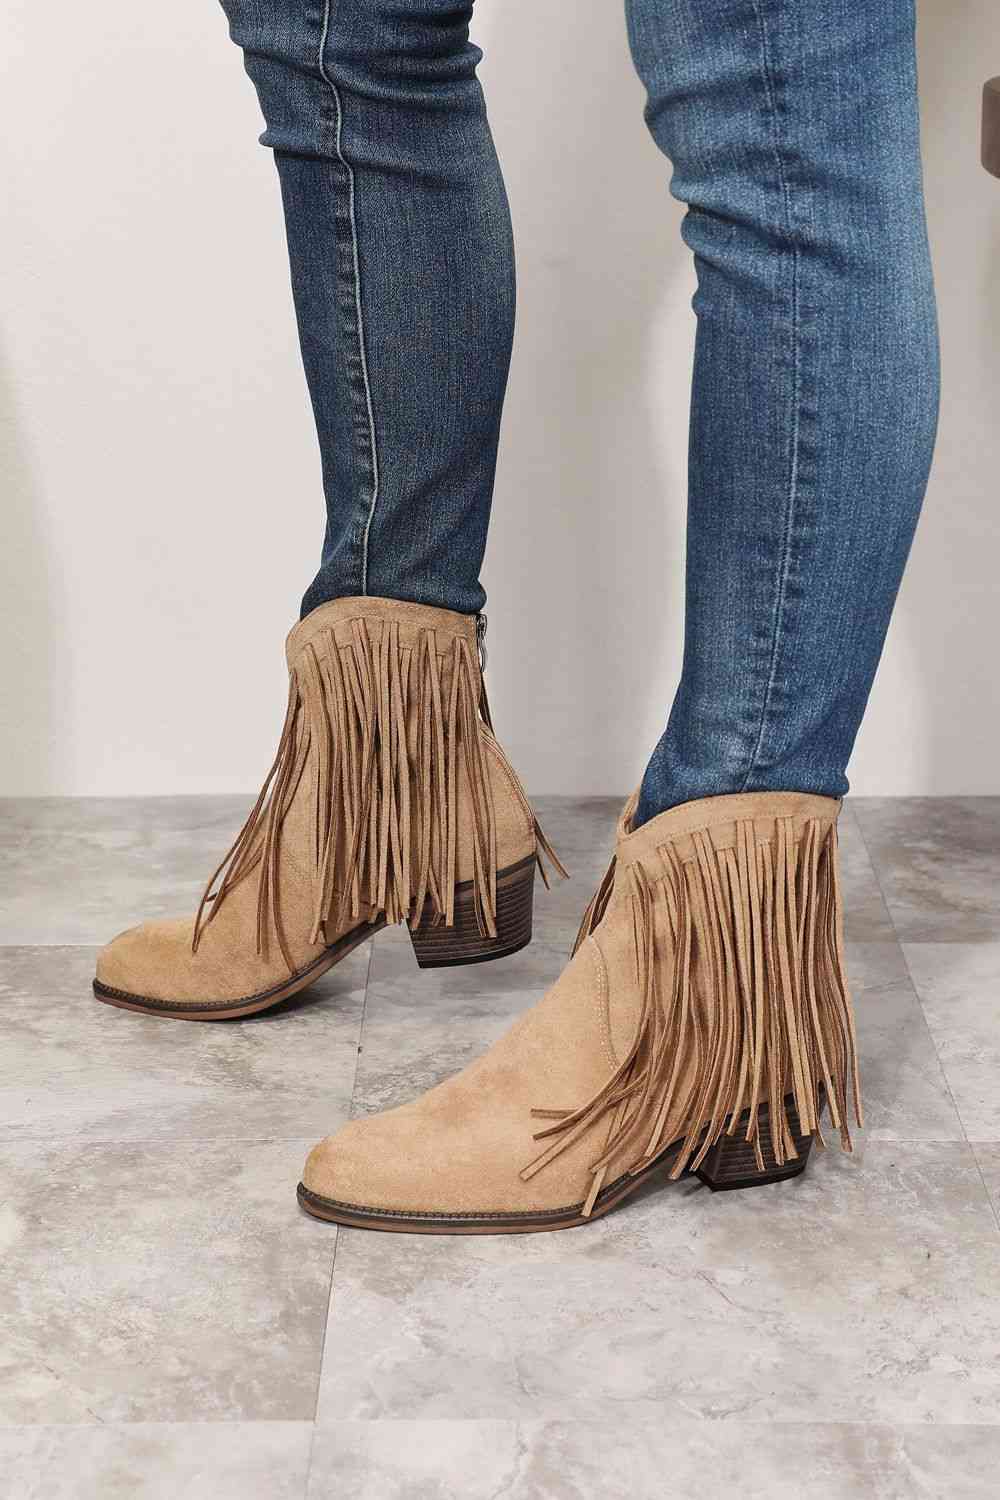 Person wearing blue jeans and brown Trendsi Legend Women's Fringe Cowboy Western Ankle Boots standing on a tiled floor.